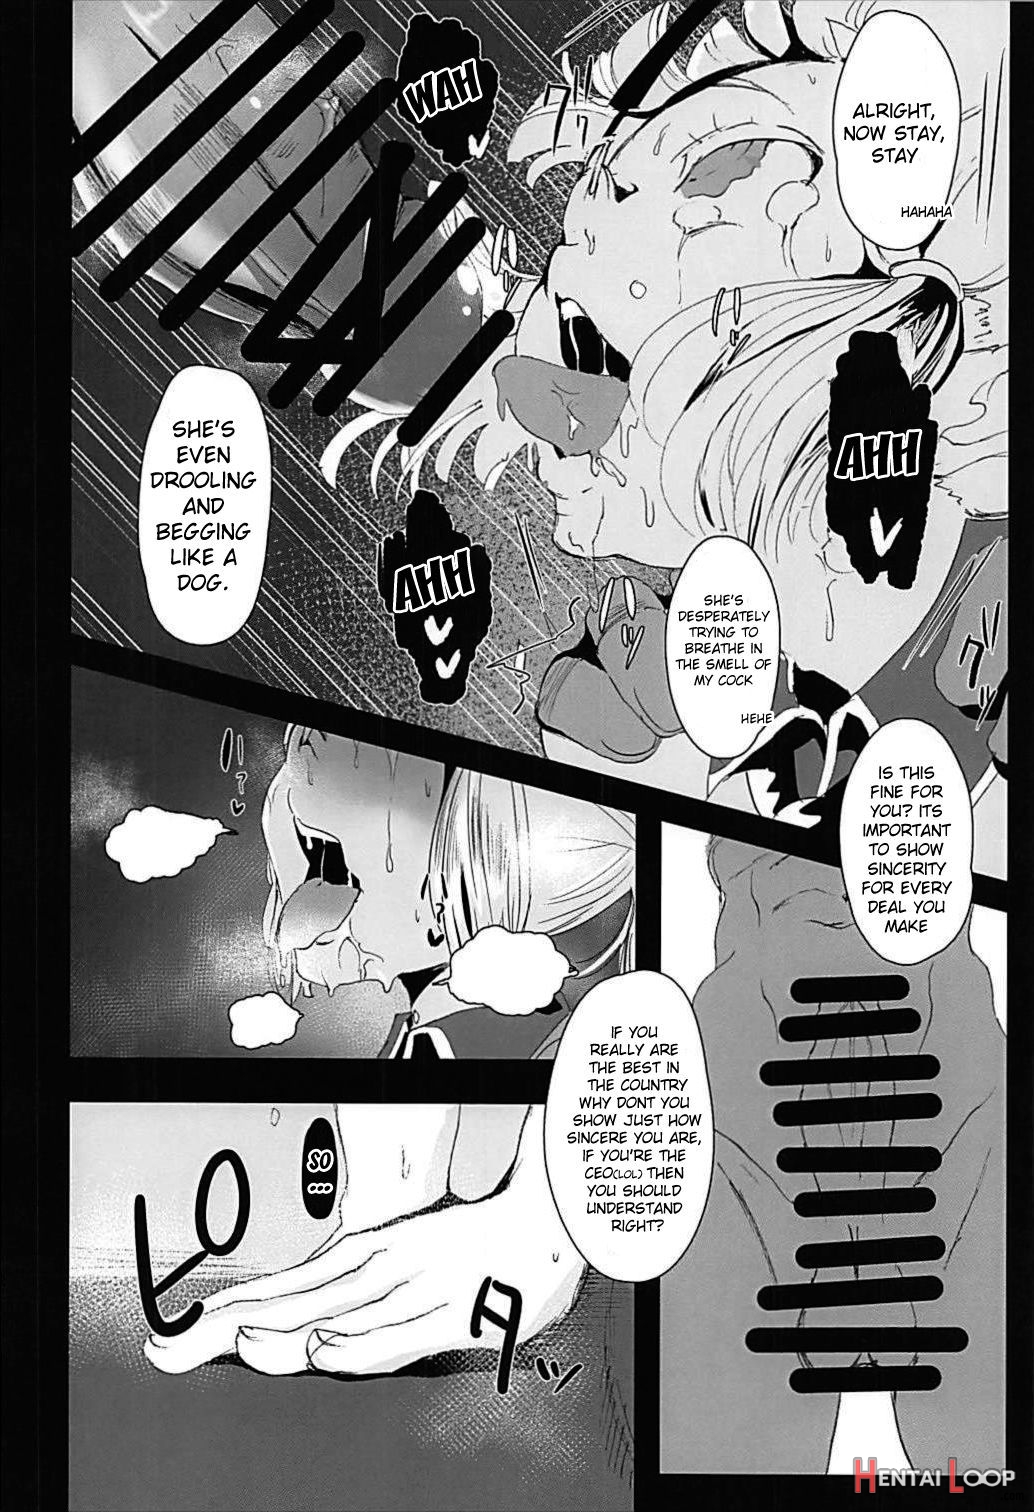 Prime Onaho page 7